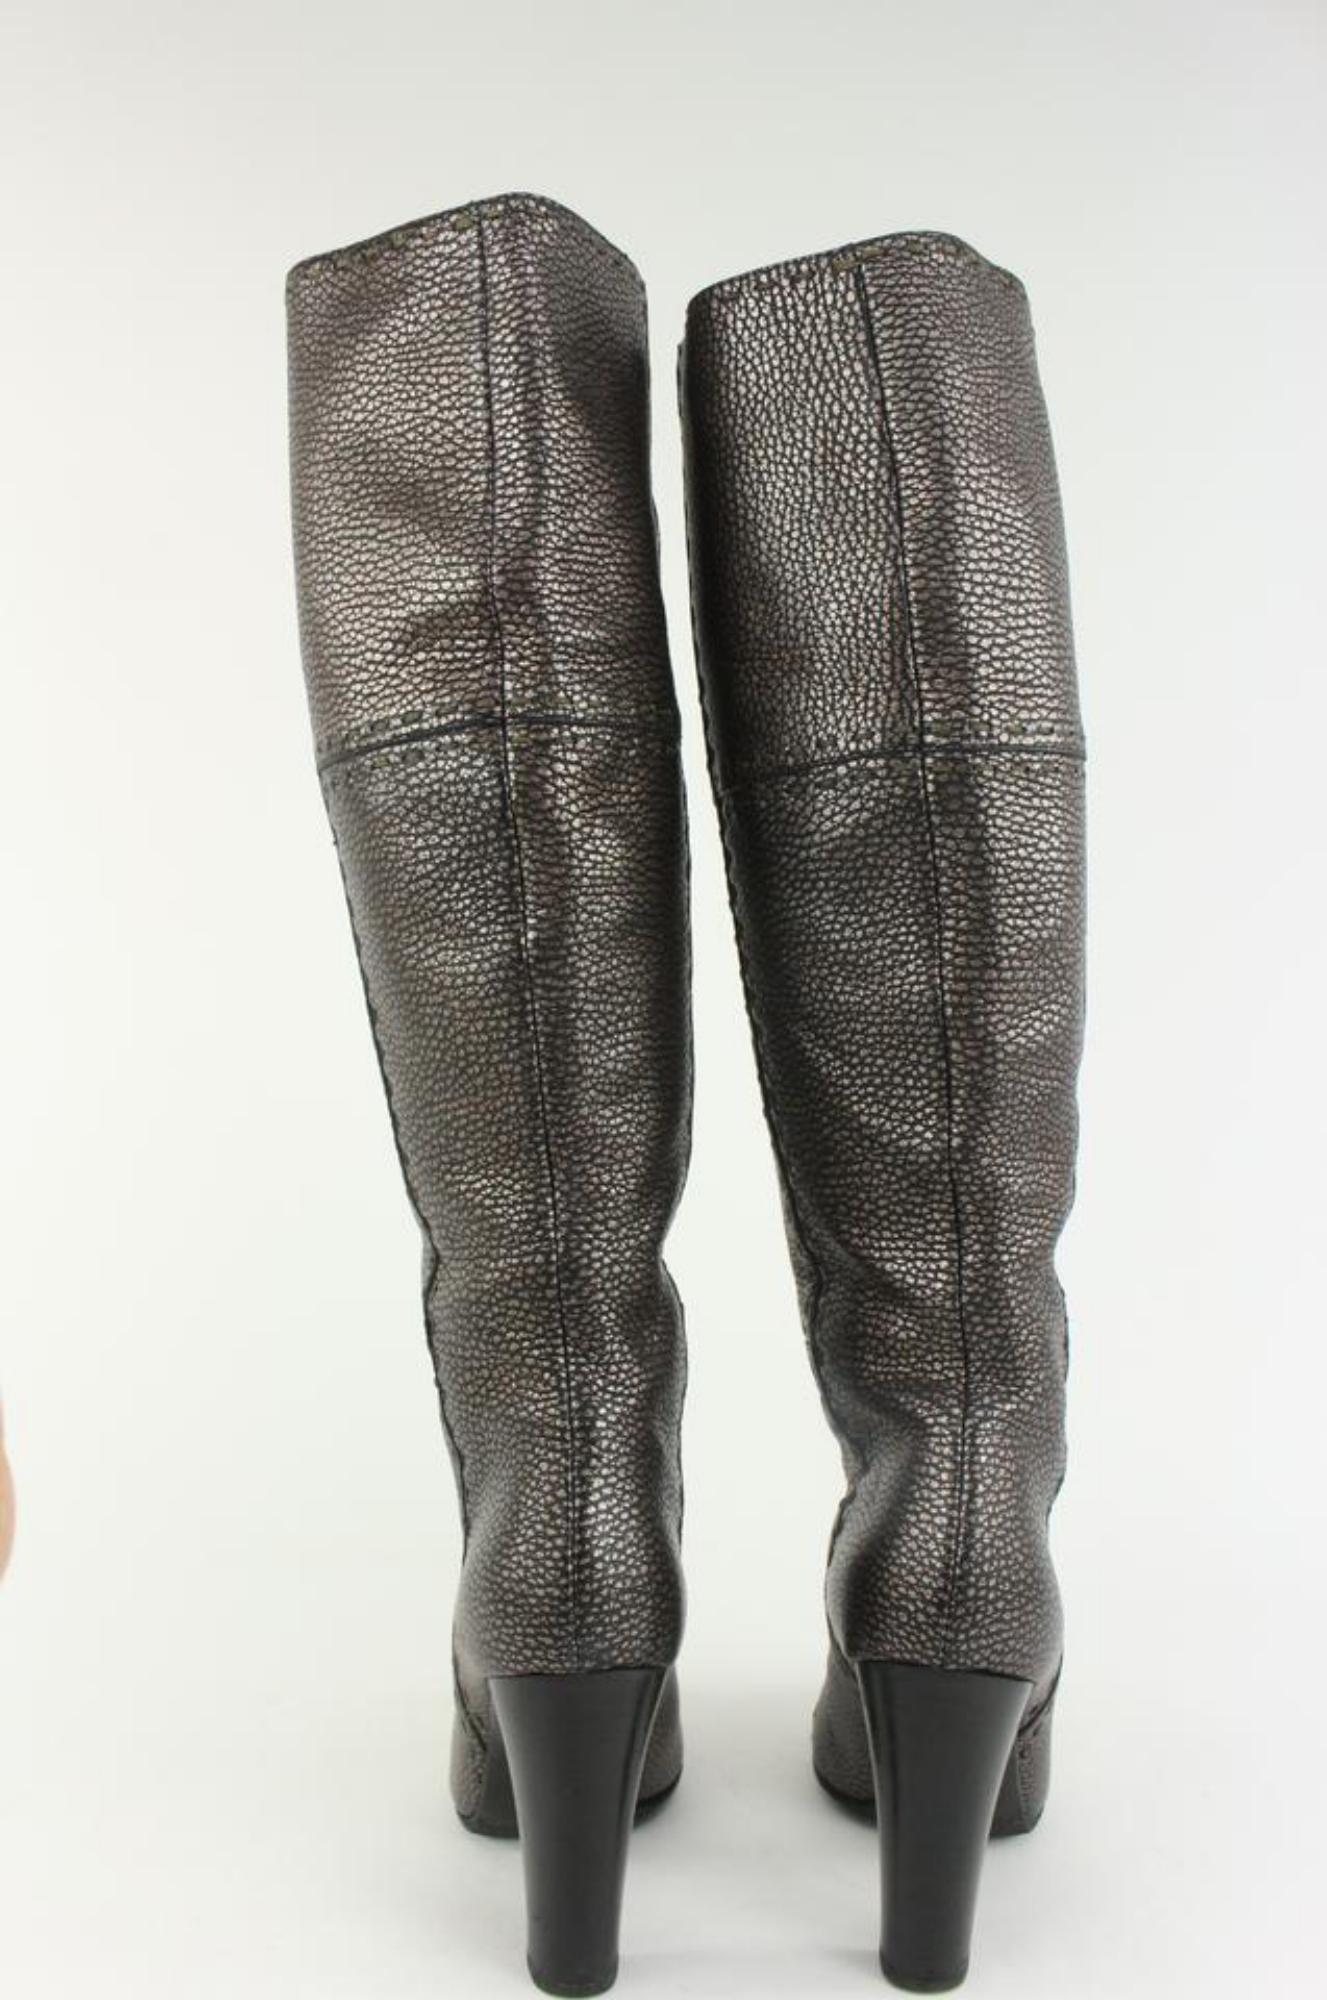 Fendi Women's 36.5 Knee High Grey Leather Selleria Boots 1F1206 For Sale 4